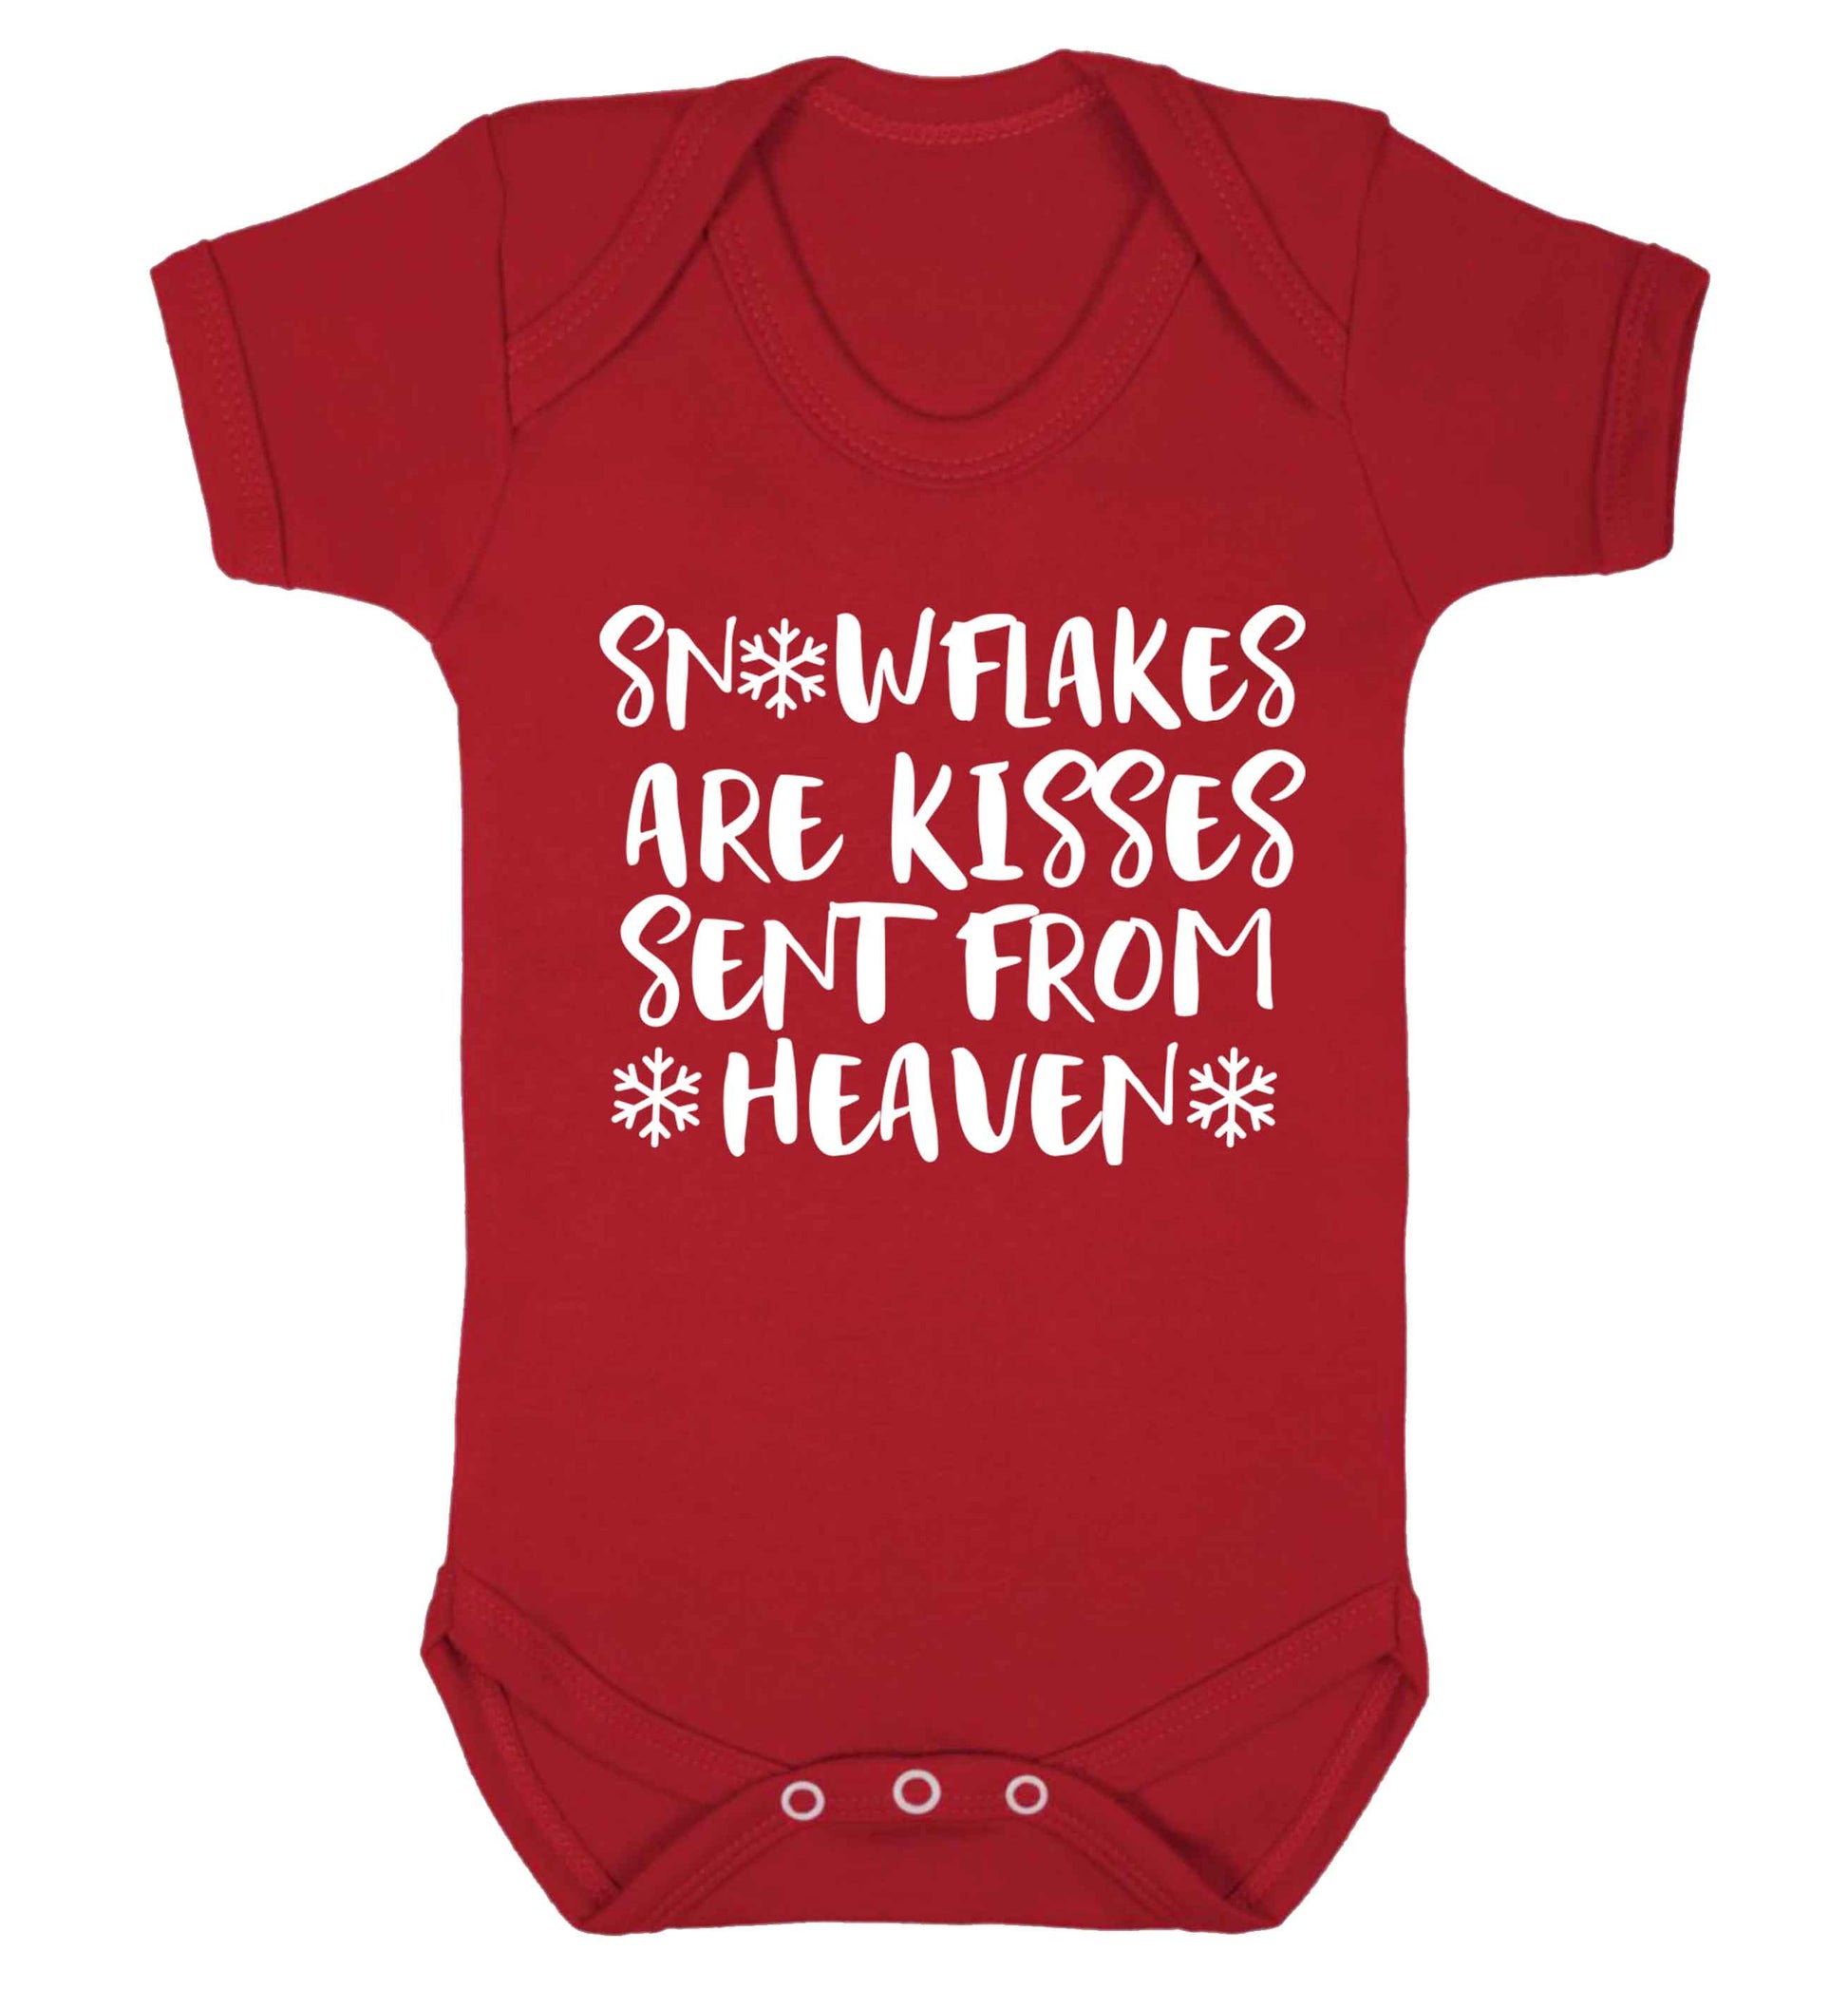 Snowflakes are kisses sent from heaven Baby Vest red 18-24 months